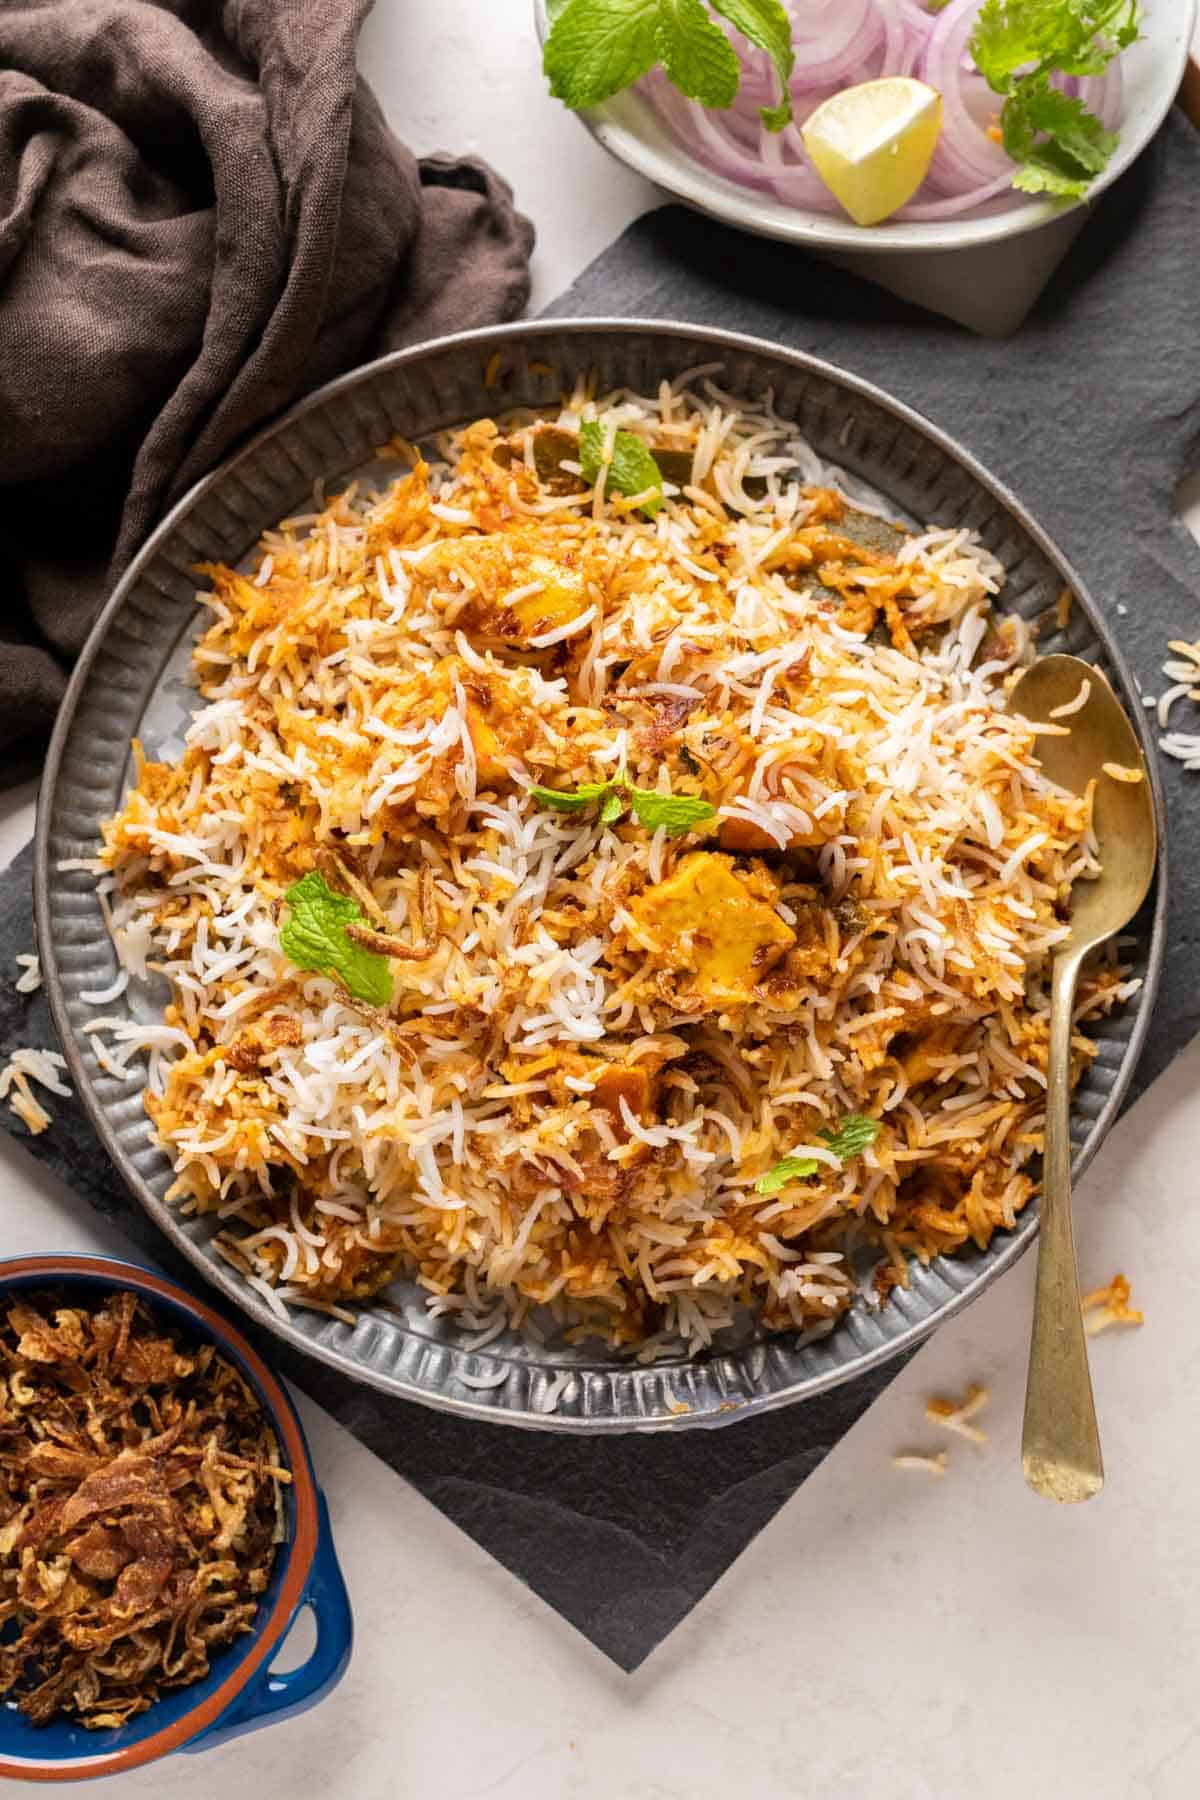 Paneer Biryani served on a grey plate with fried onions on the side